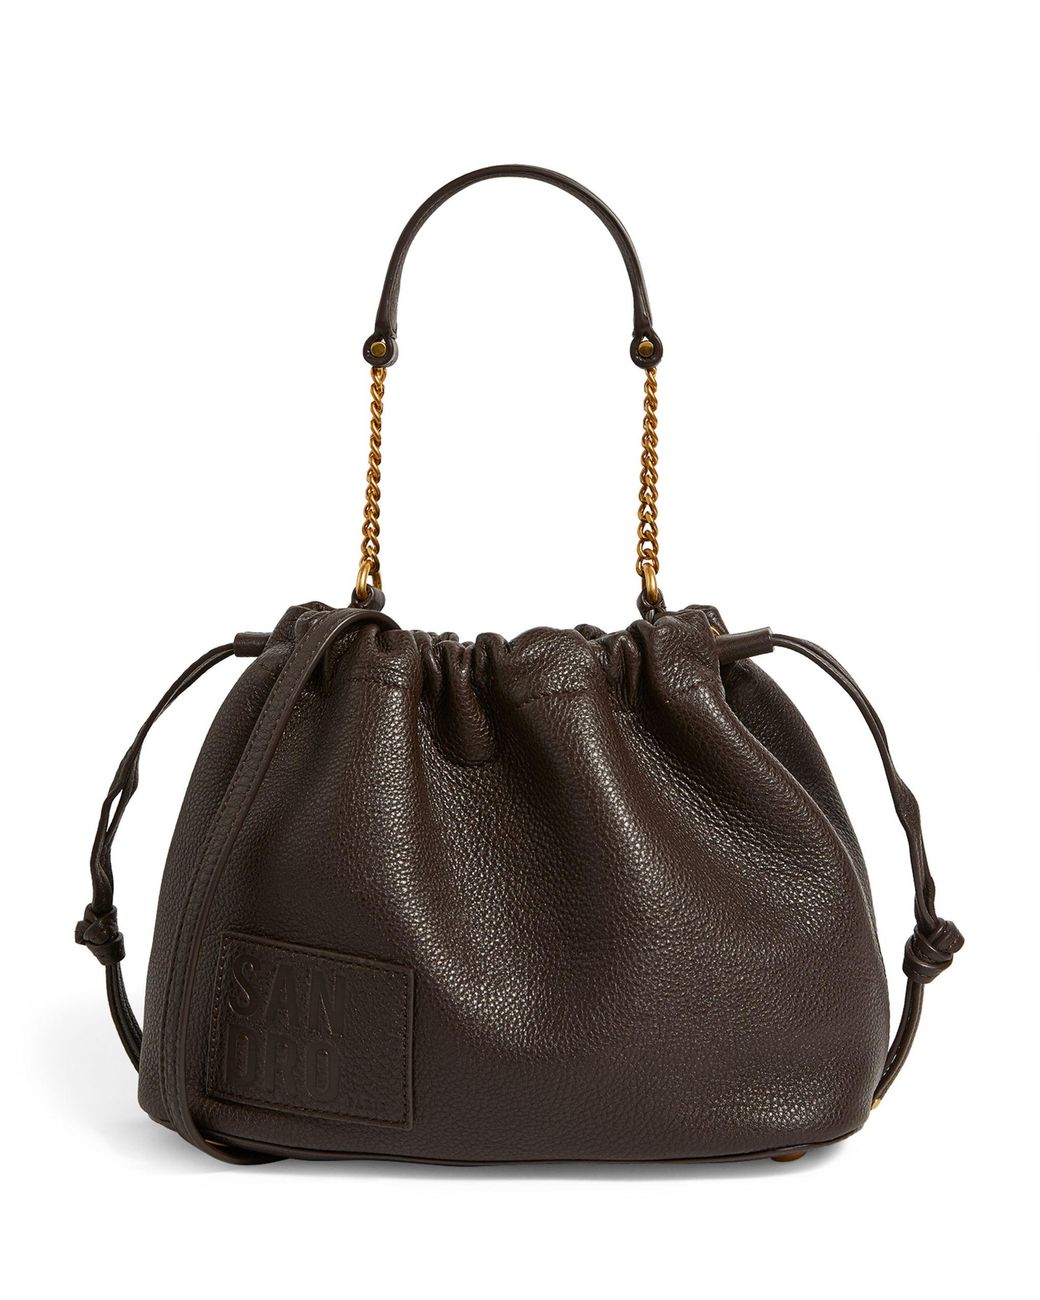 Sandro Grained Leather Bucket Bag in Brown